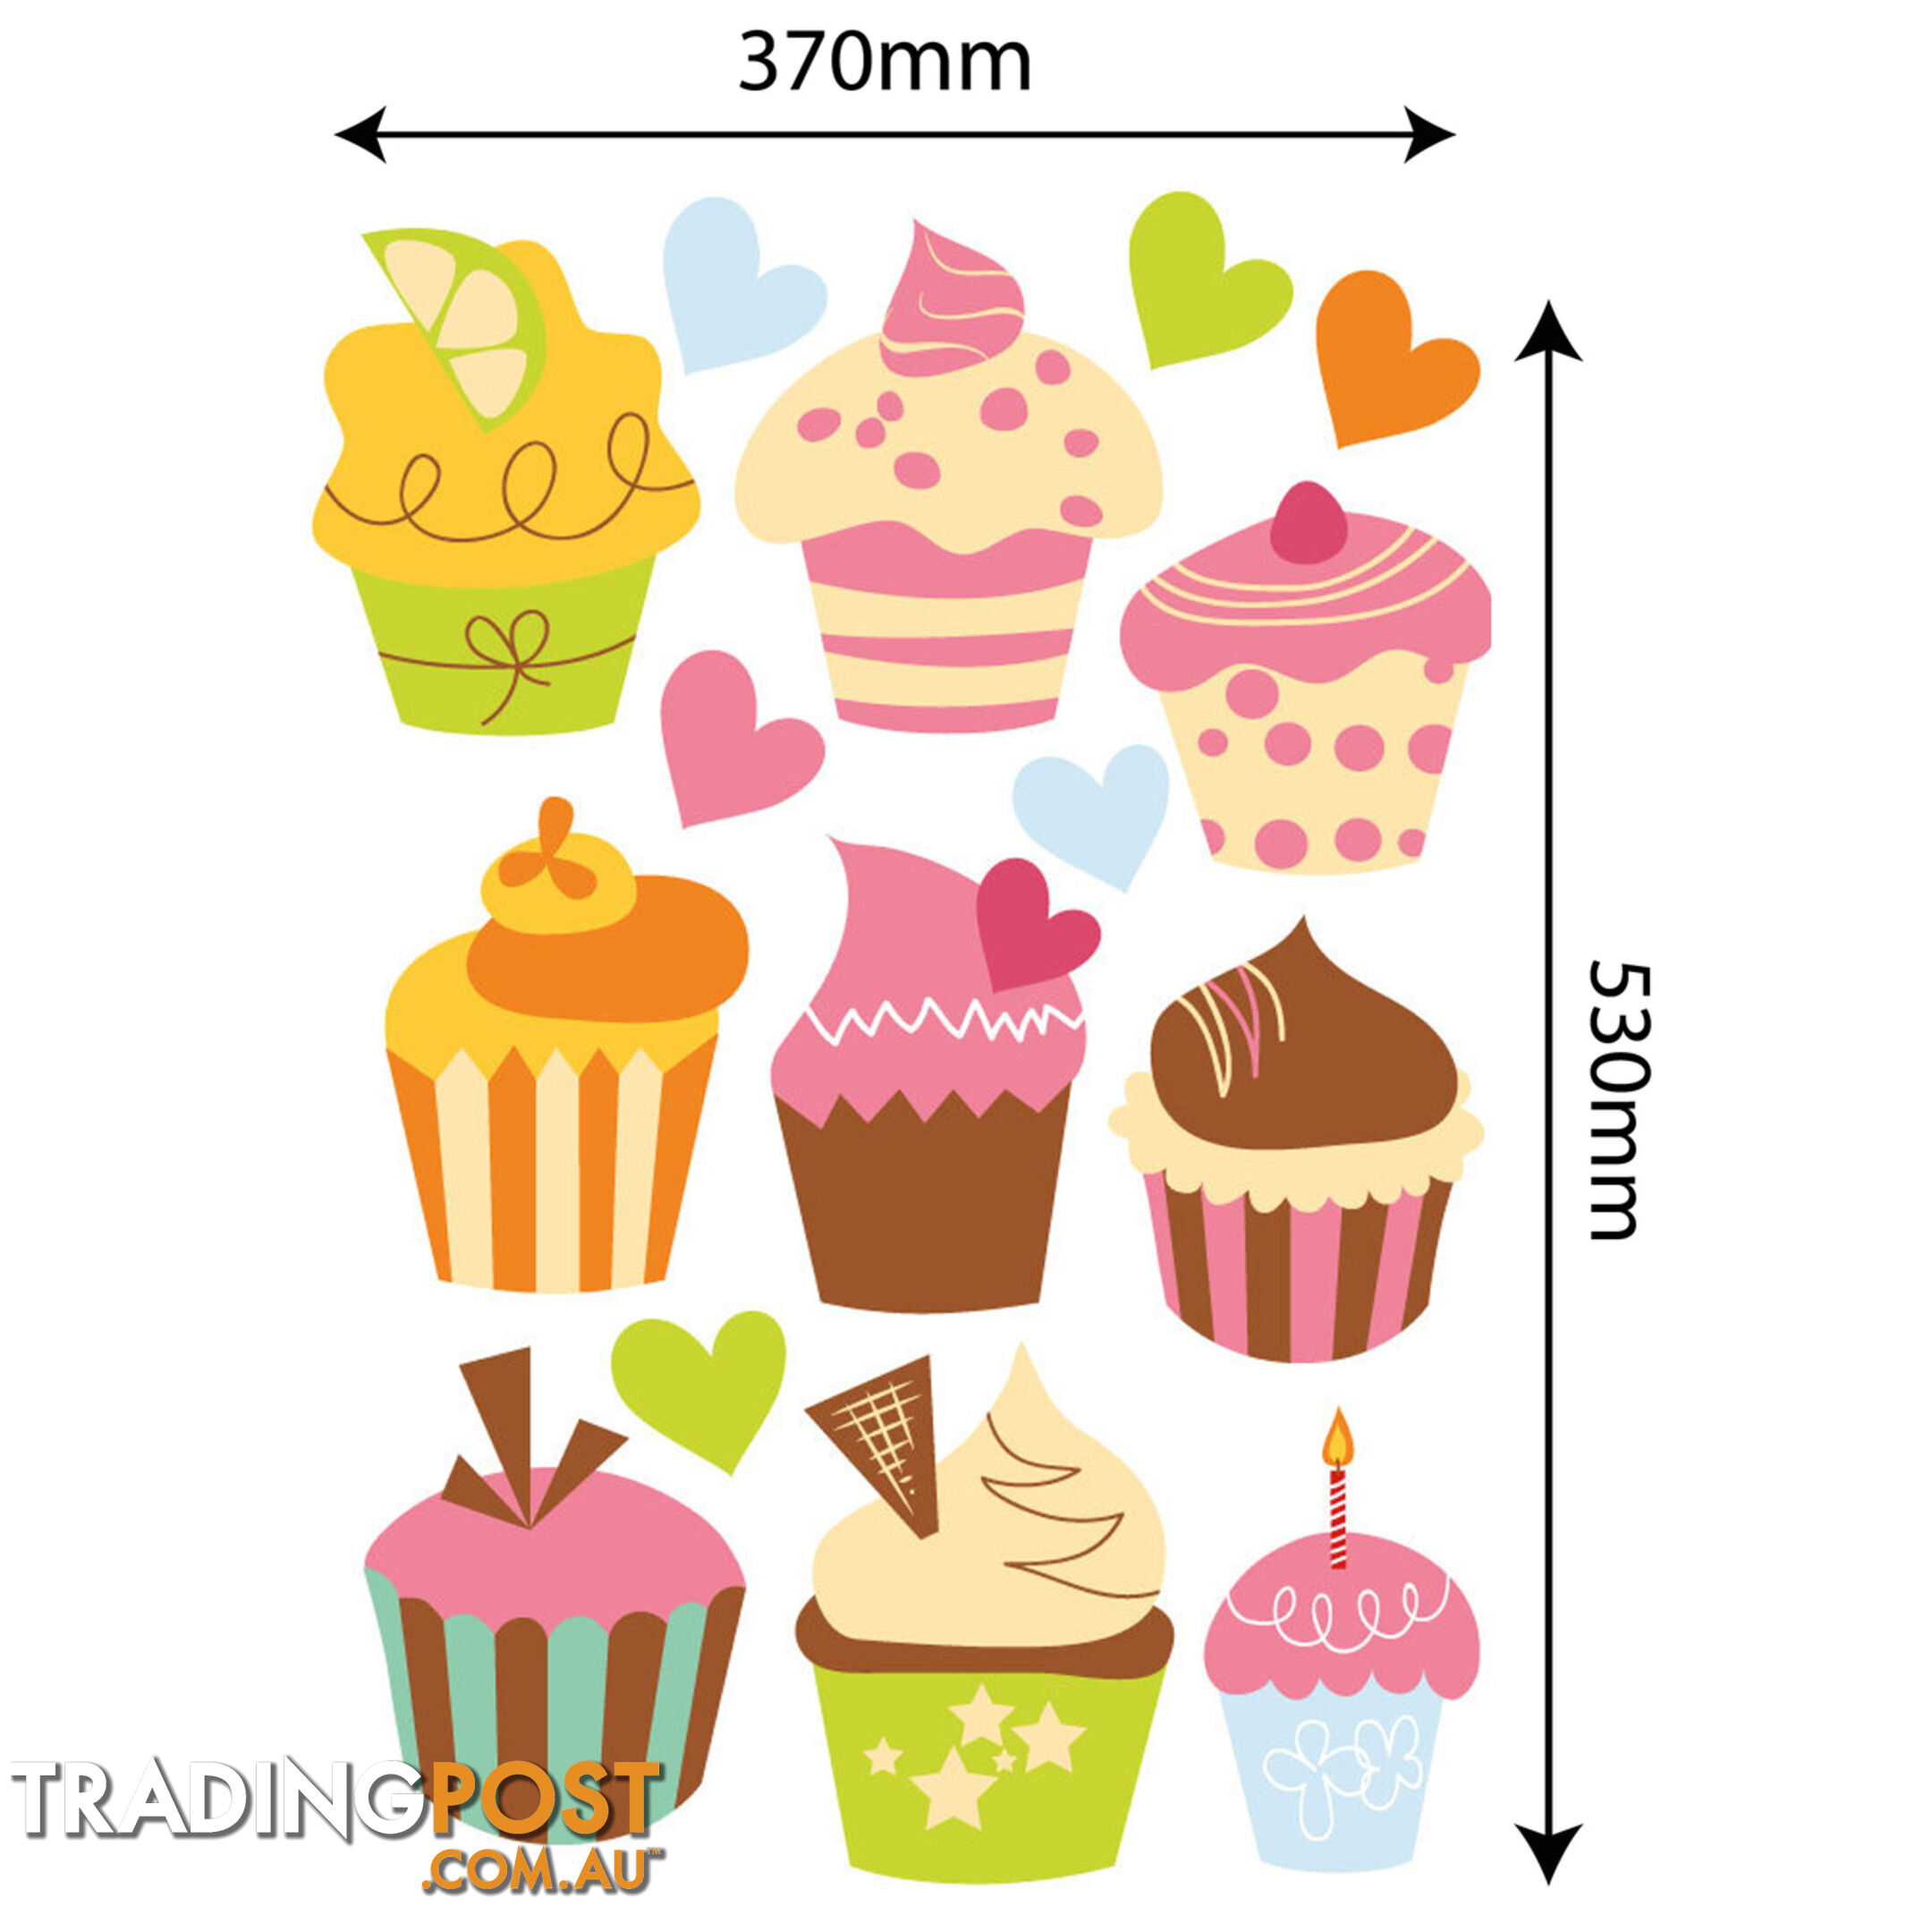 Large Size Cute Cupcakes Wall Stickers - Totally Movable and Reusable